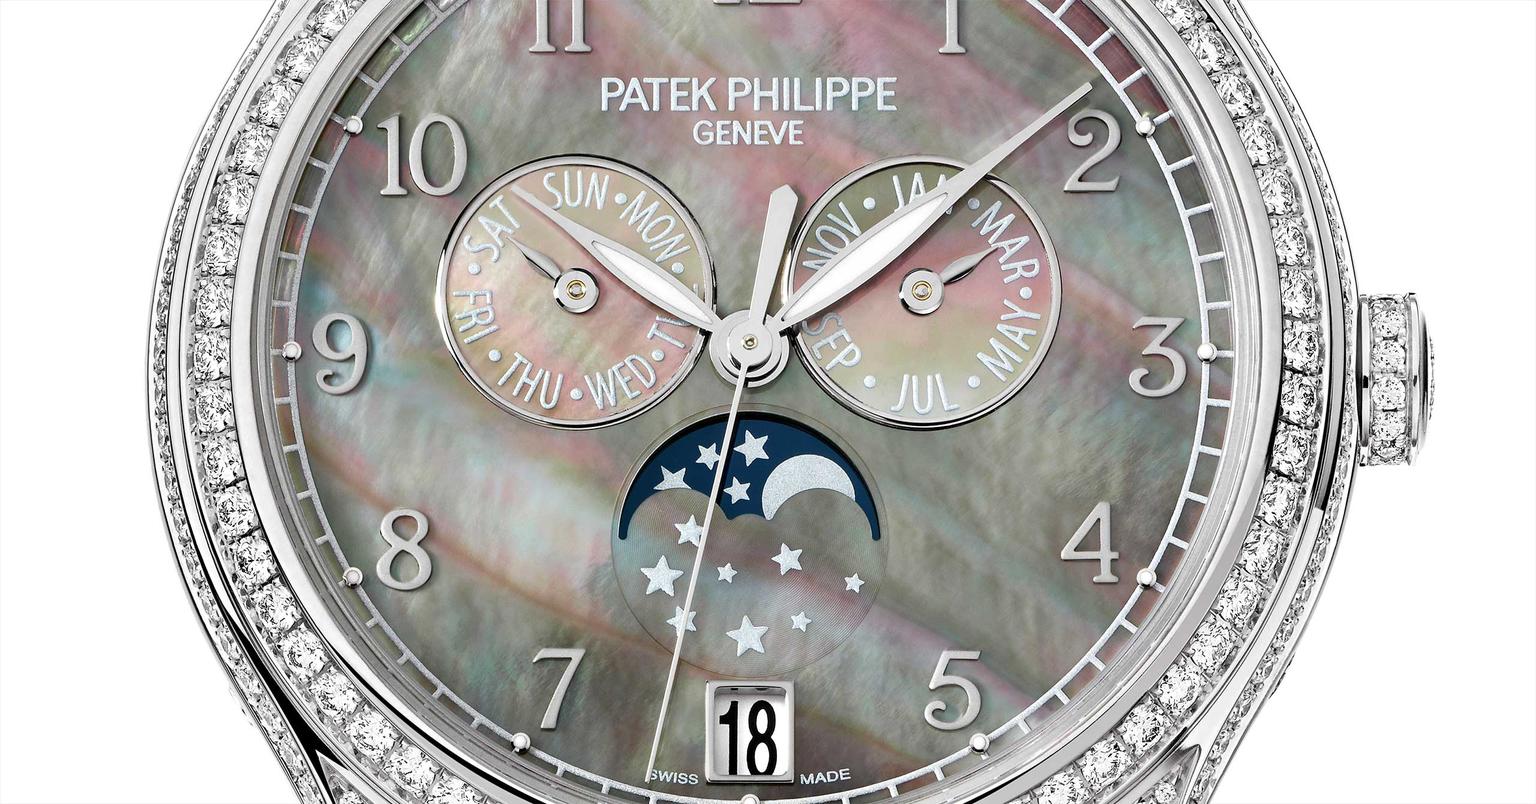 Patek Philippe ladies' moonphase watch new for 2015